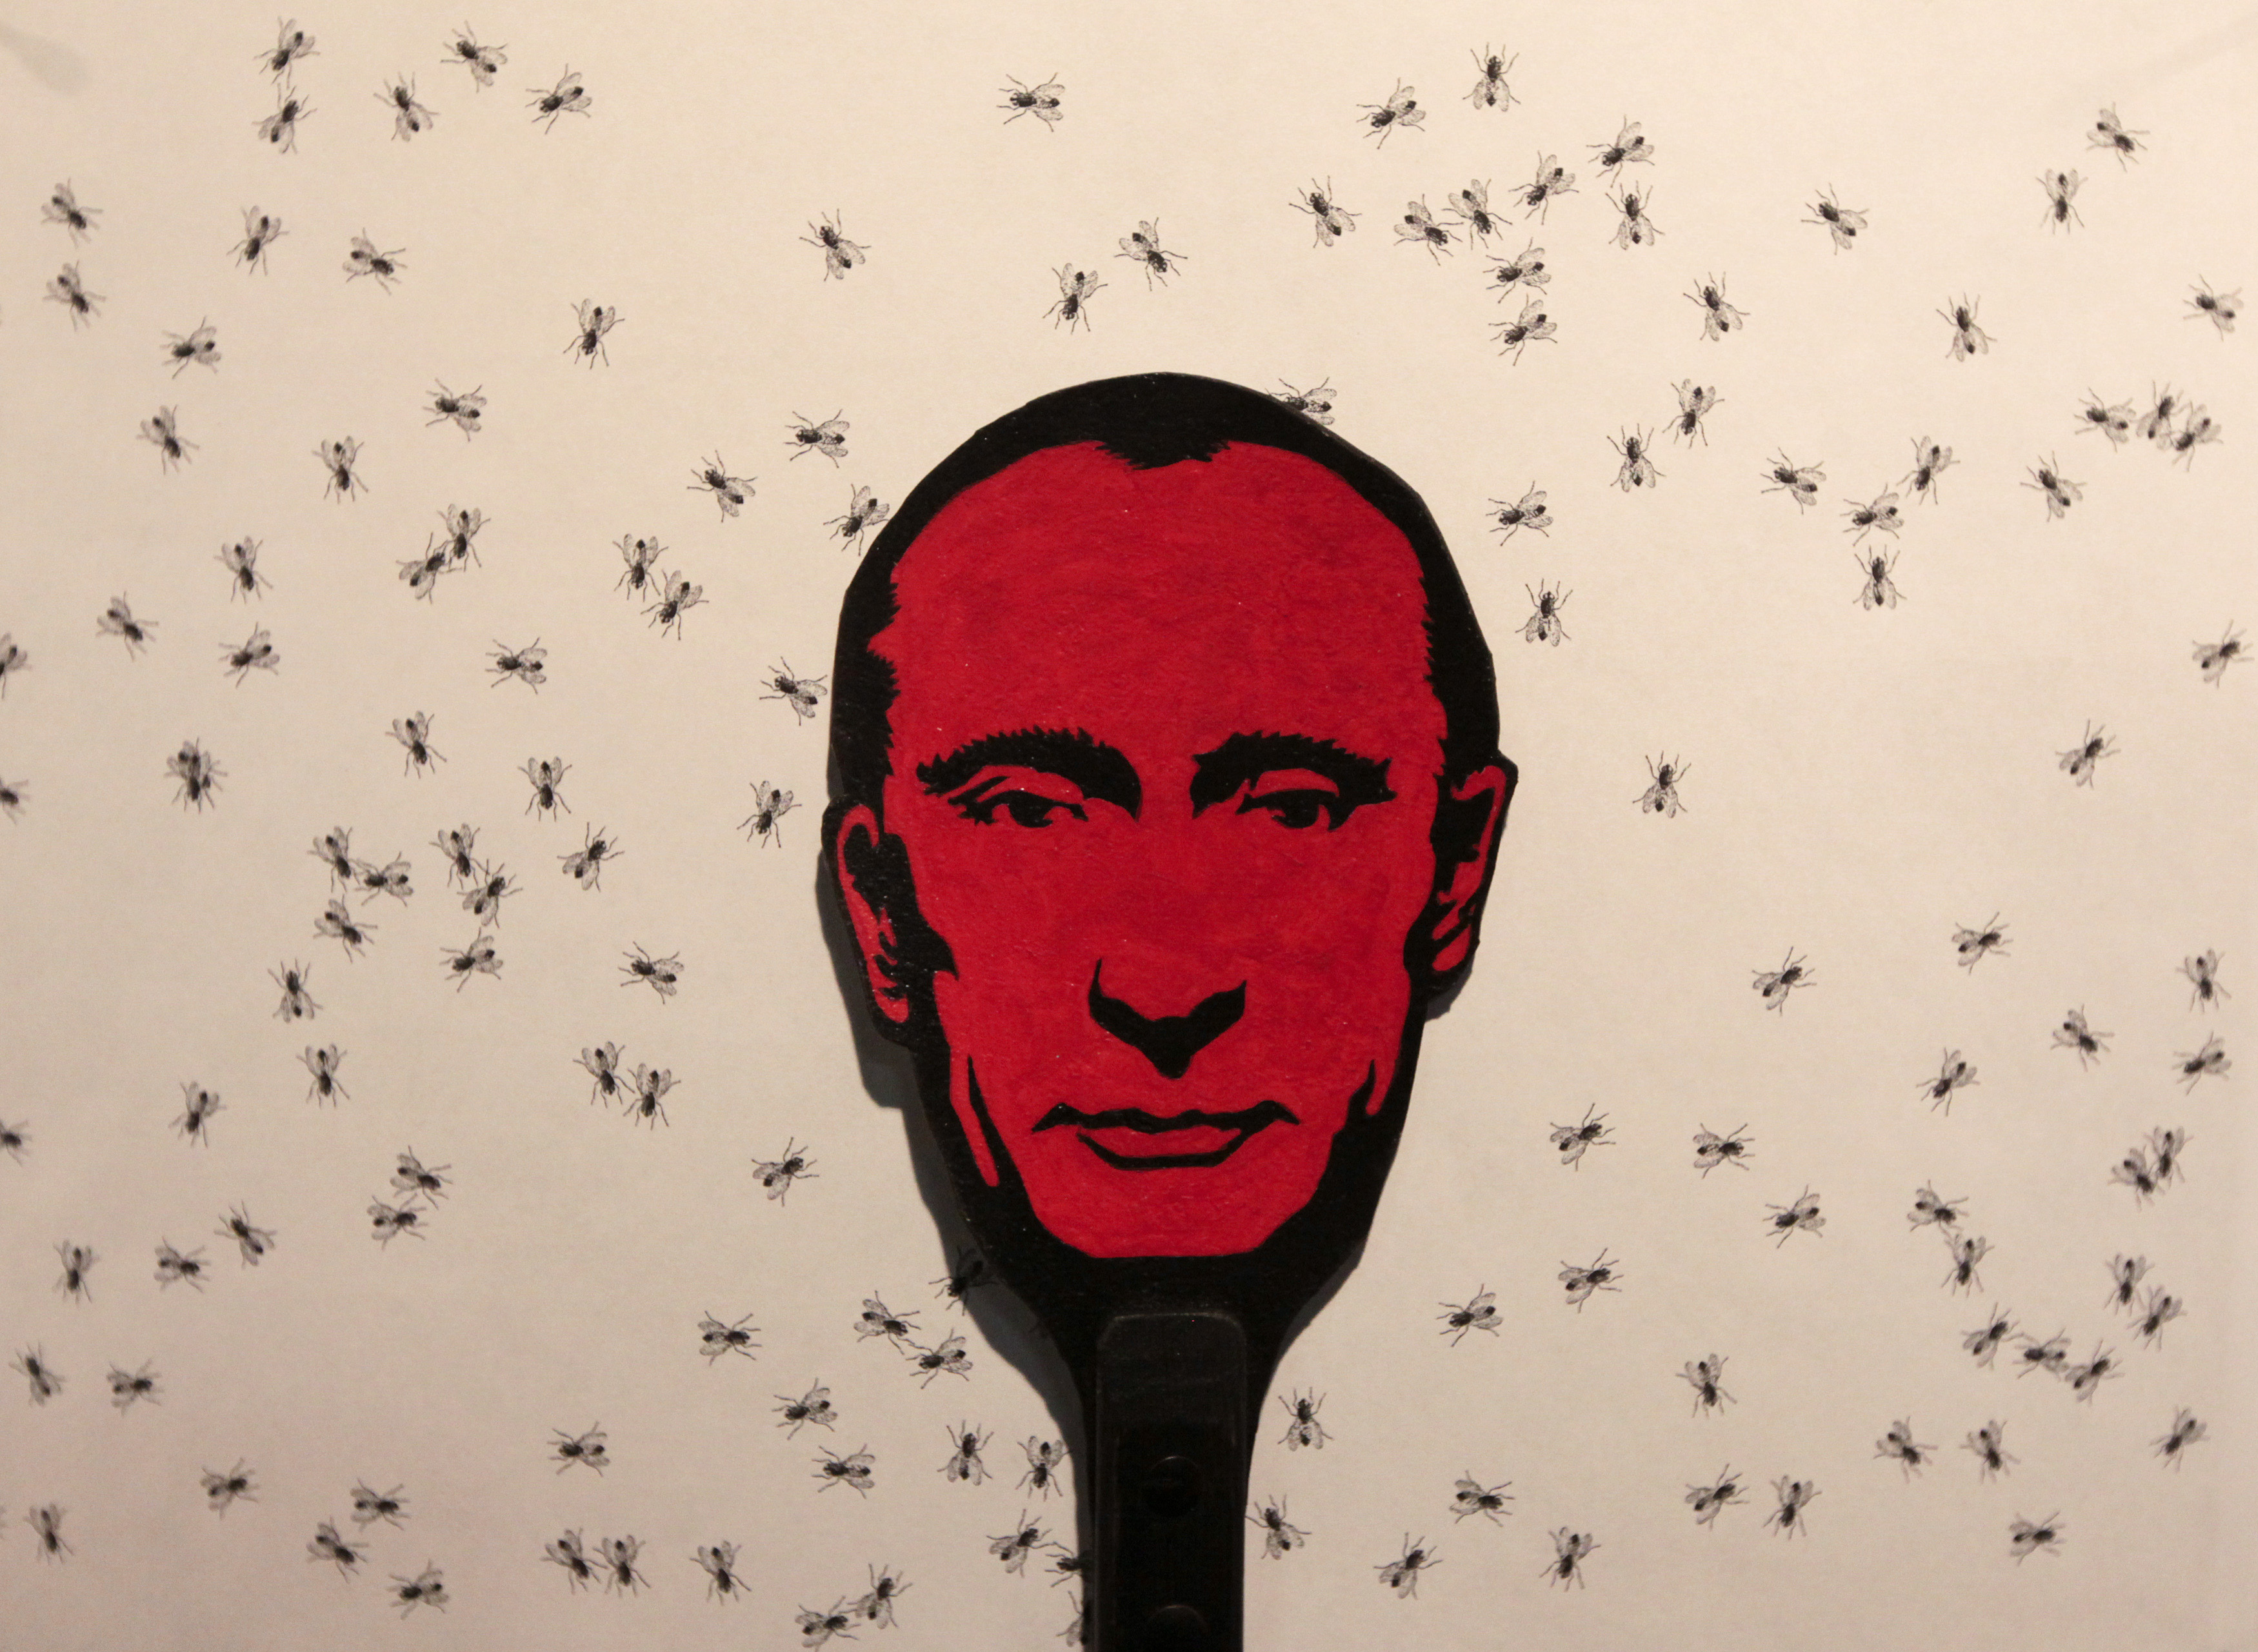 A flyswatter displaying an image of  Russia's President Vladimir Putin, which is part of an art installation by Russian artist Vasily Slonov, is on display at the Krasnoyarsk Museum Centre